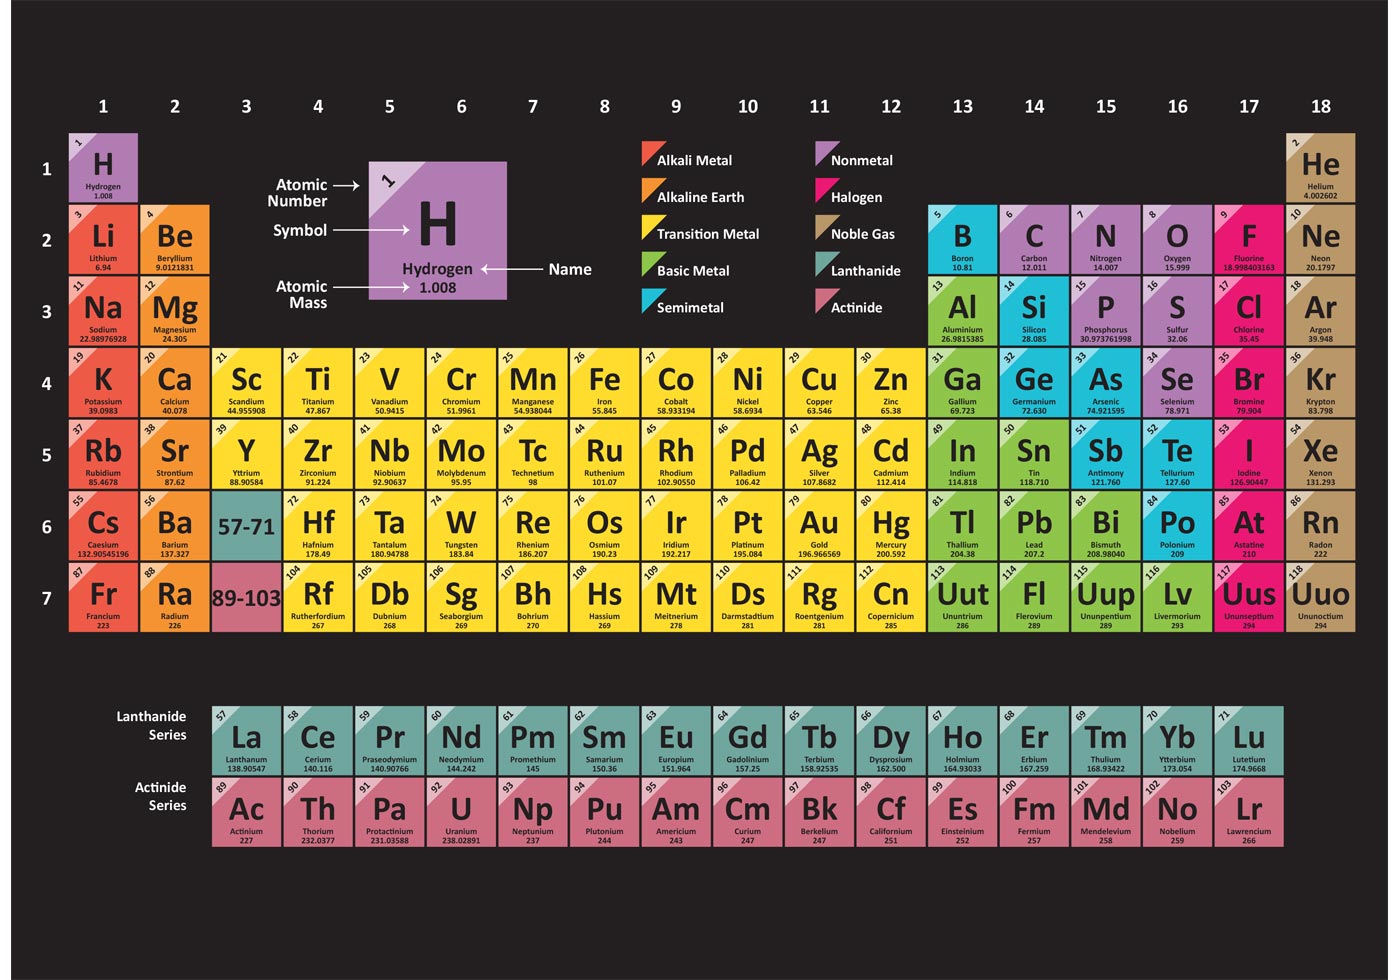 Colorful Periodic Table - Download Free Vector Art, Stock Graphics & Images